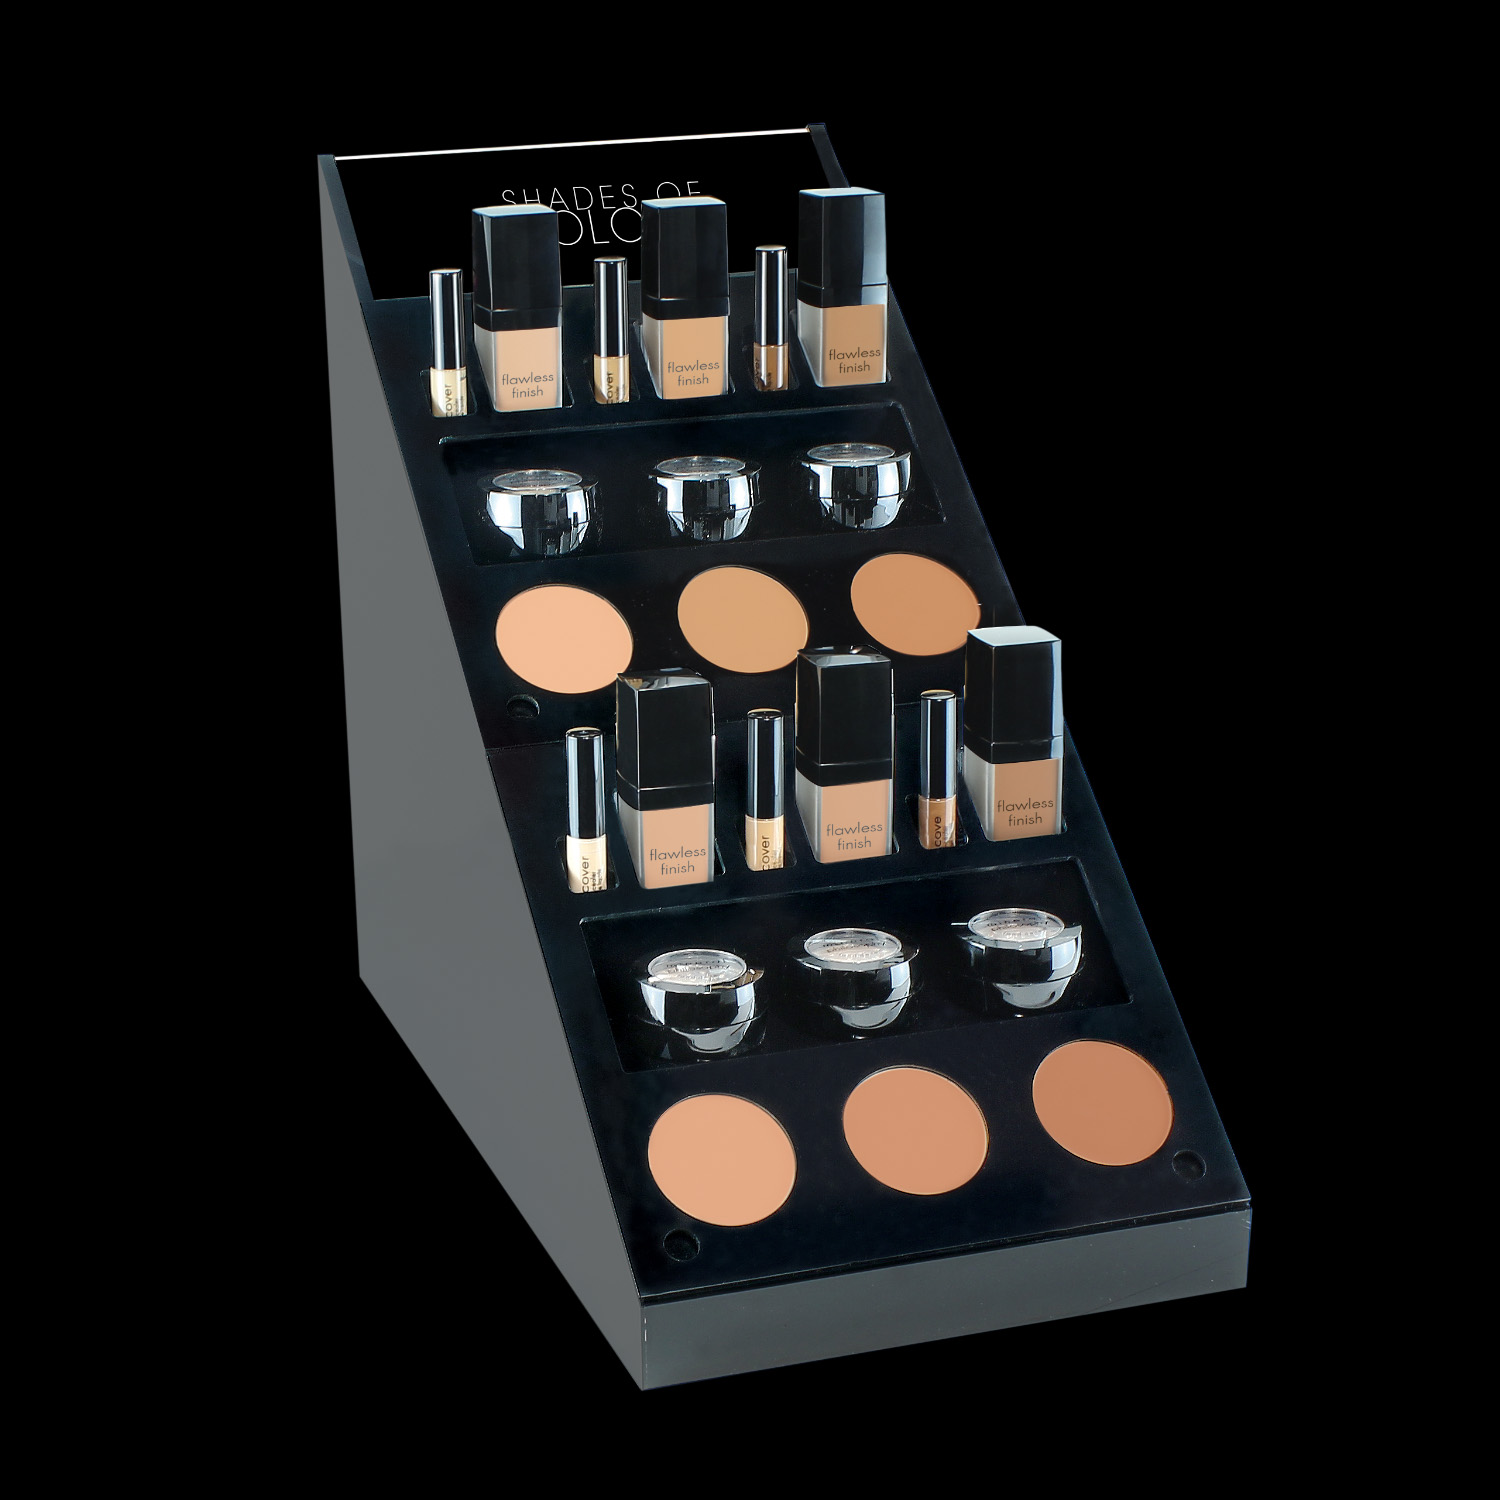 Classic packaging Visionary faceware displays to create an exquisite retail environment with ease